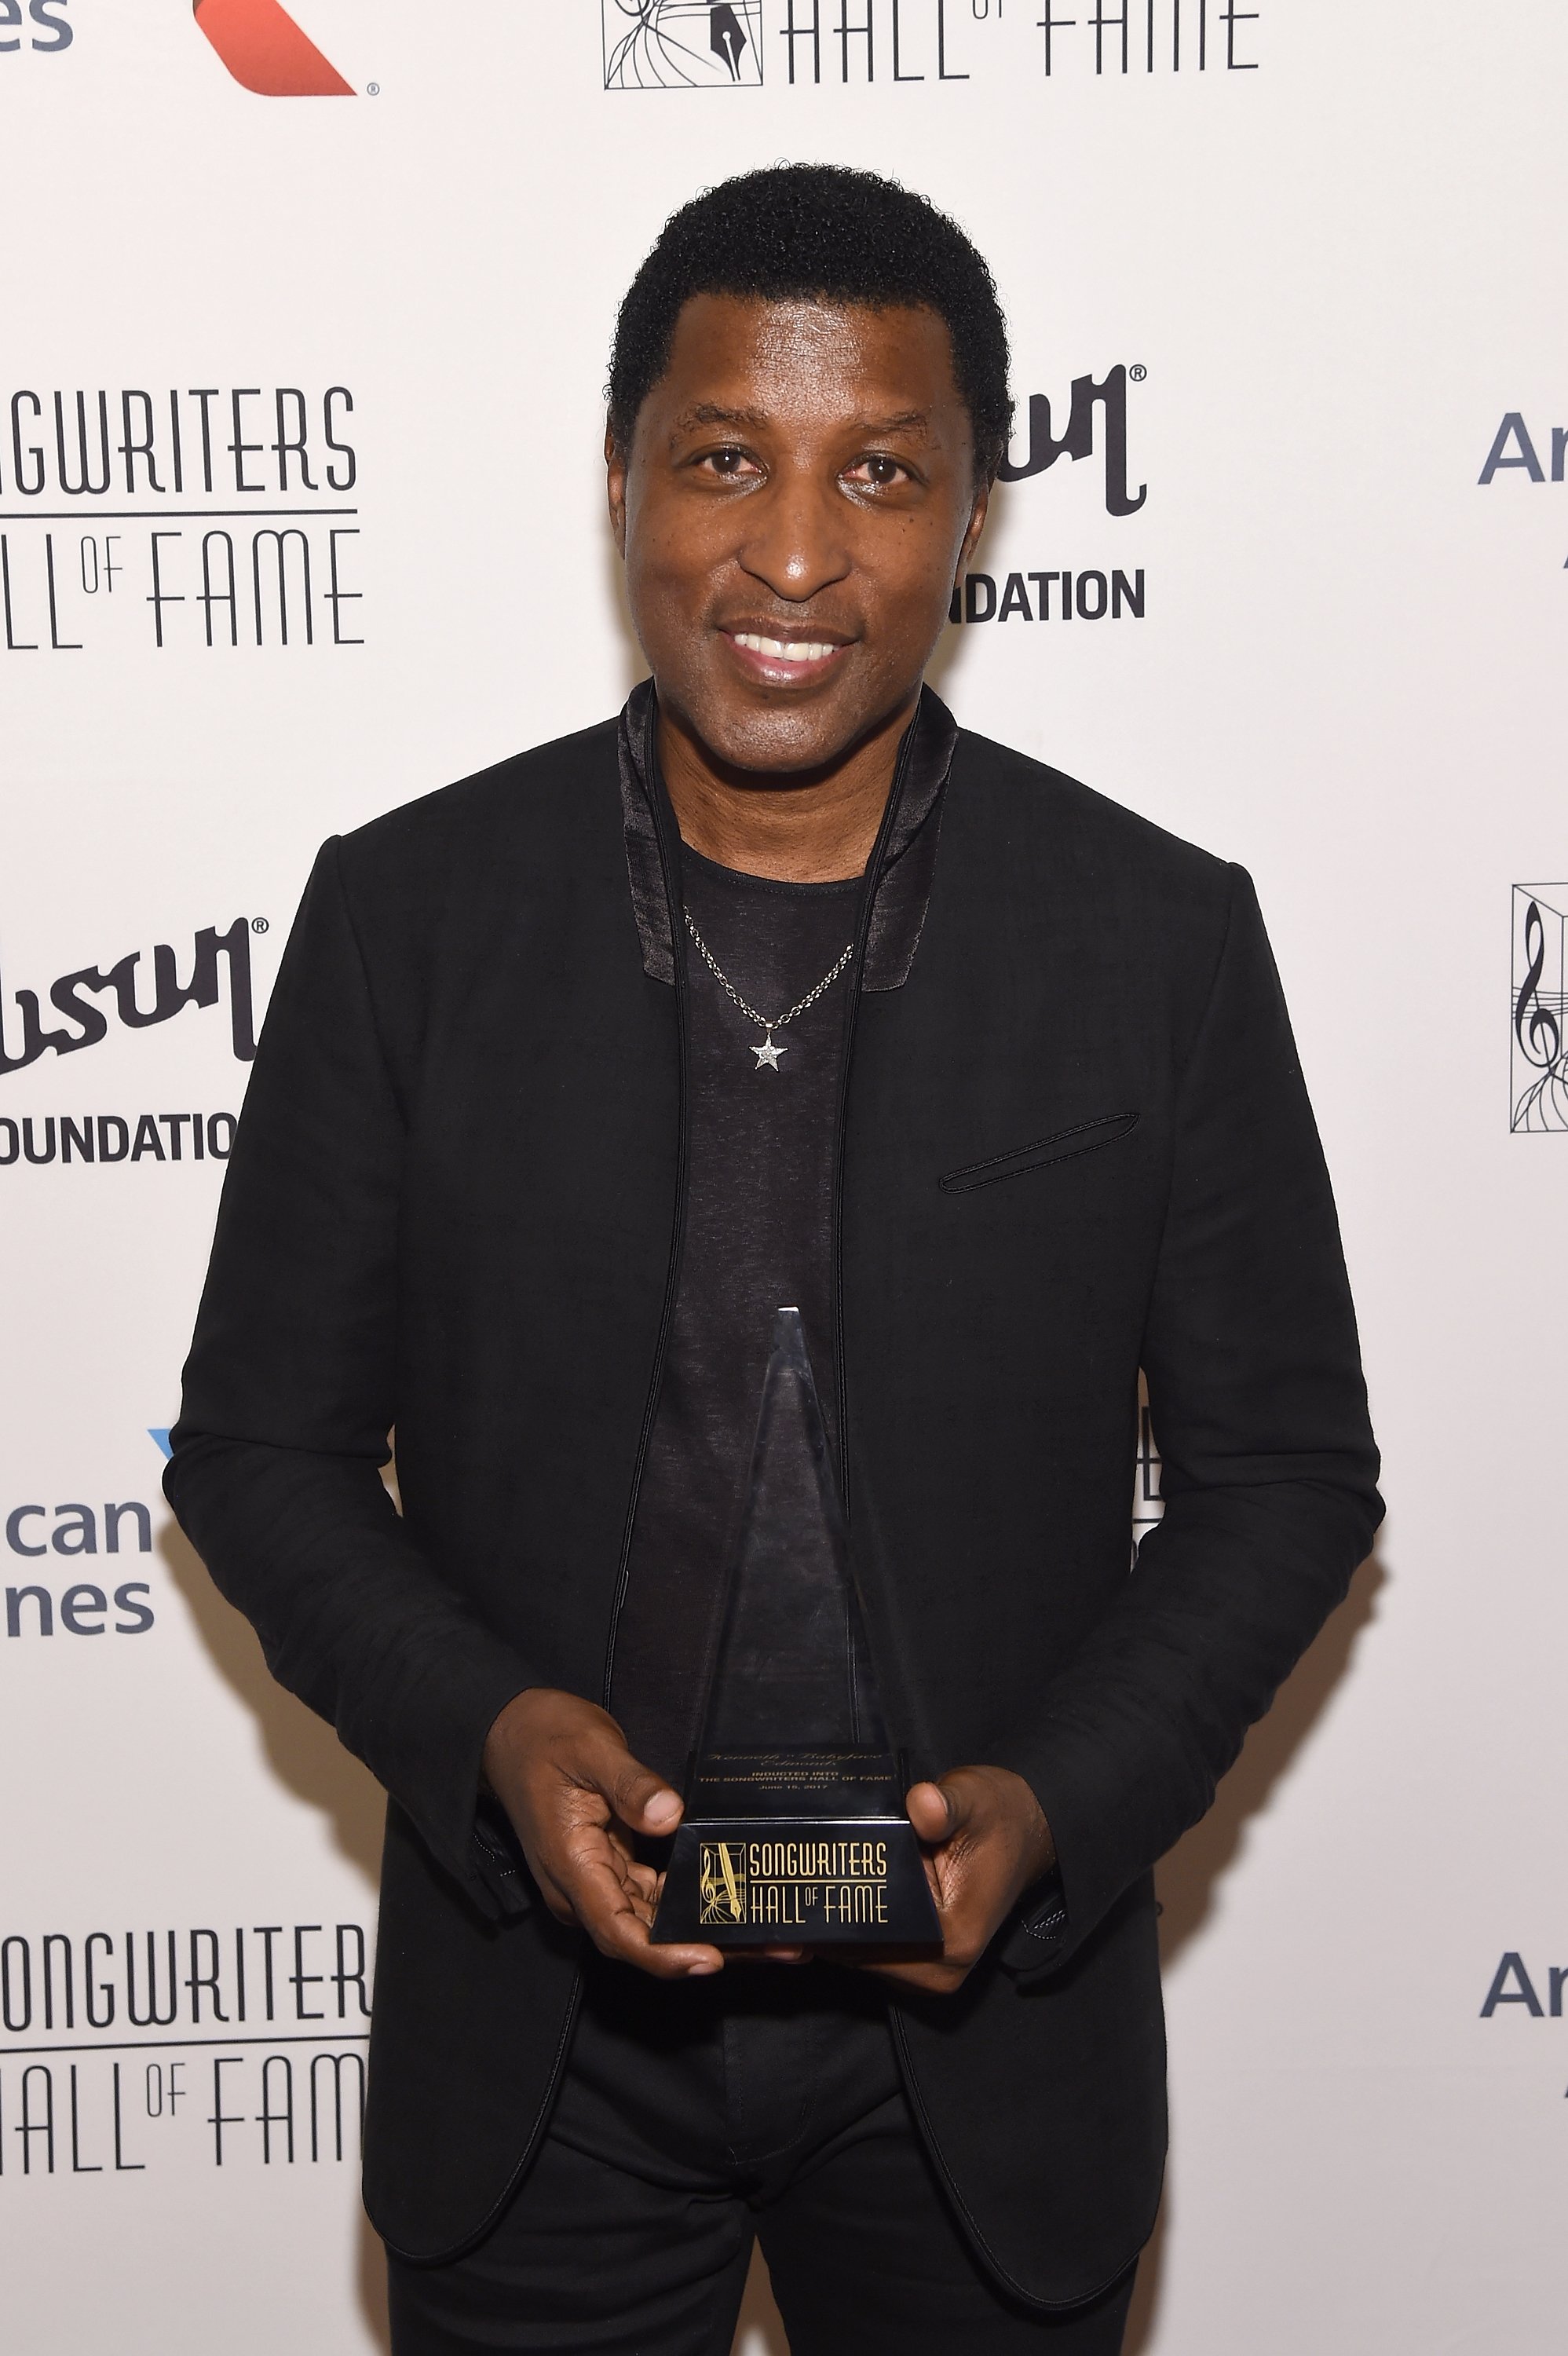 Babyface at the Songwriters Hall of Fame 48th Annual Induction Awards in June 2017. | Photo: Getty Images